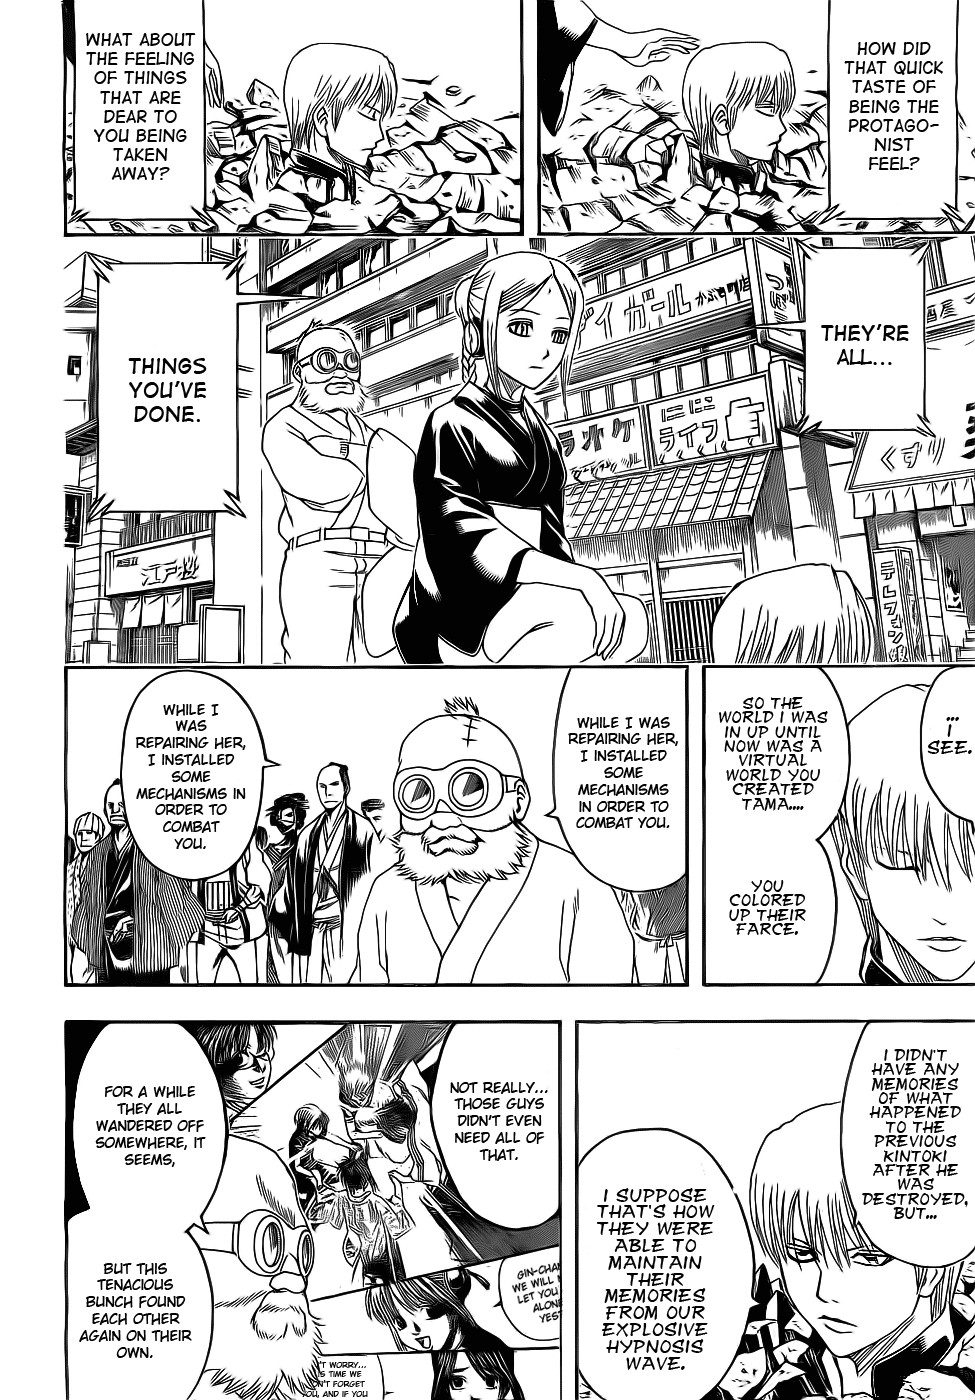 Gintama chapter 380 page 15